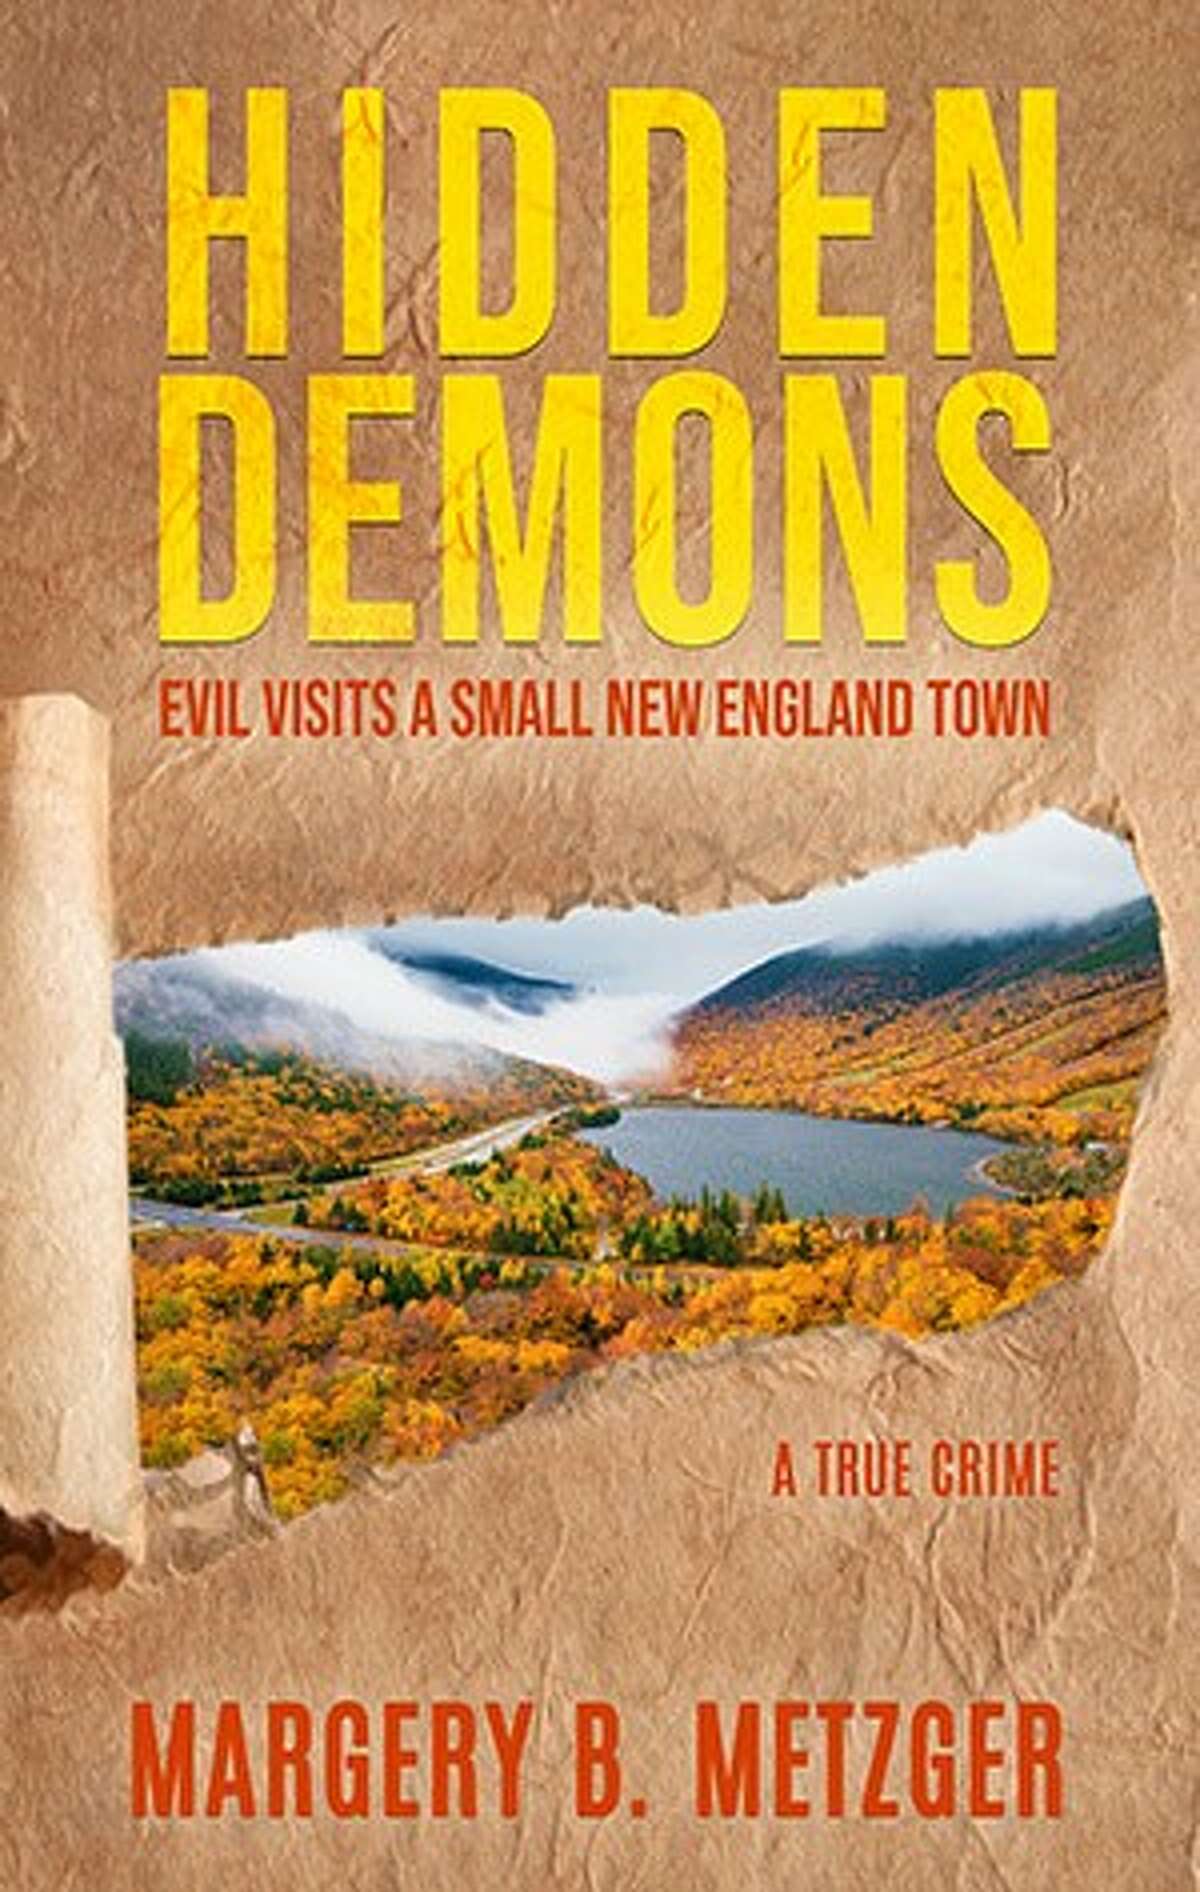 Three Berkshire crimes involving Wayne Lo, Lewis Lent Jr. and Nicholas Mangiardi inspired Margery Metzger's "Hidden Demons: Evil Visits A Small New England Town."